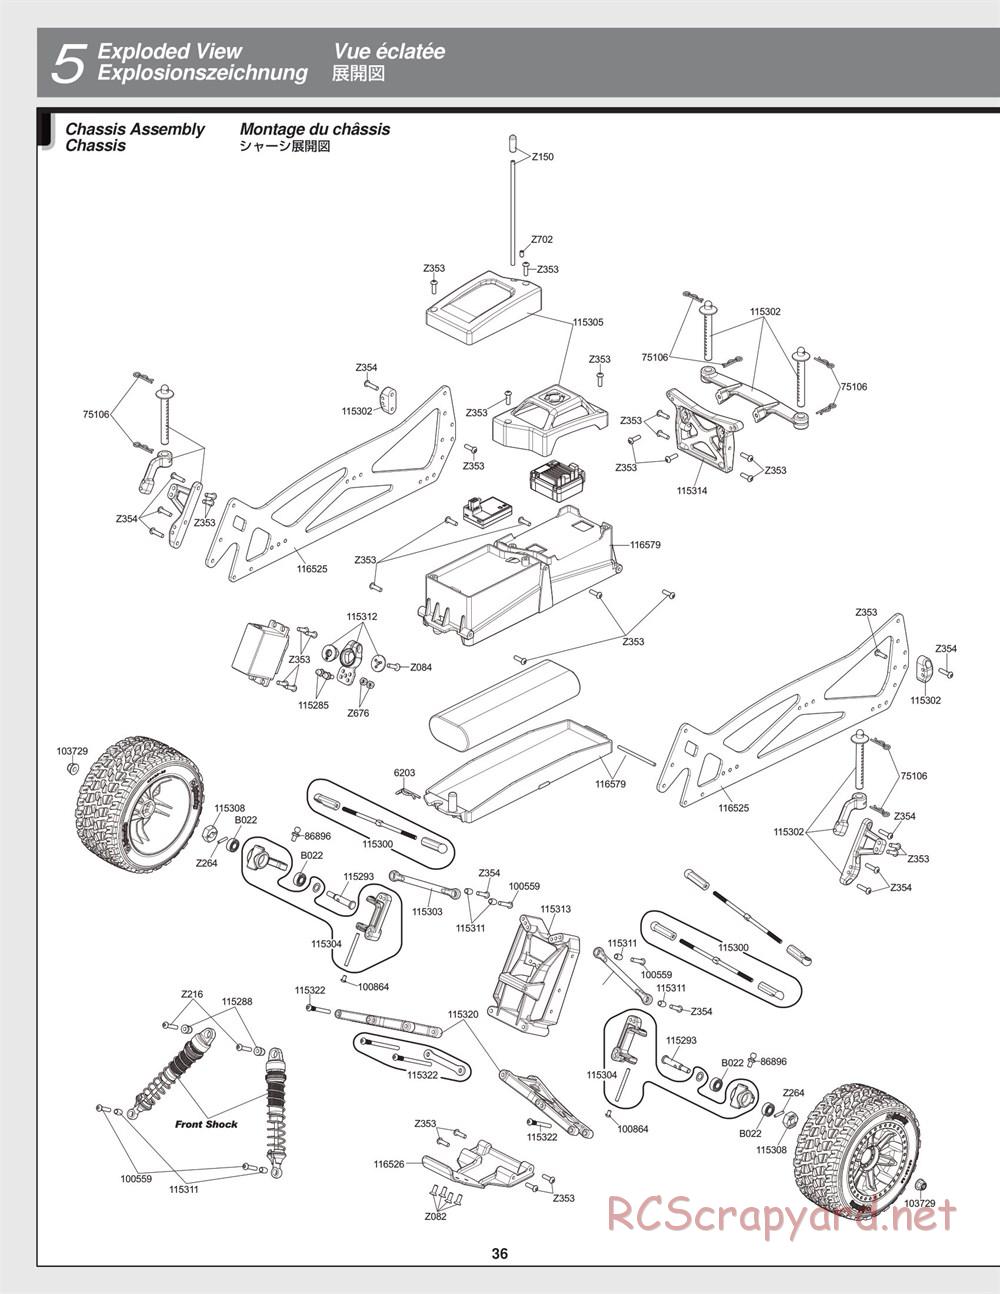 HPI - Jumpshot ST - Exploded View - Page 36